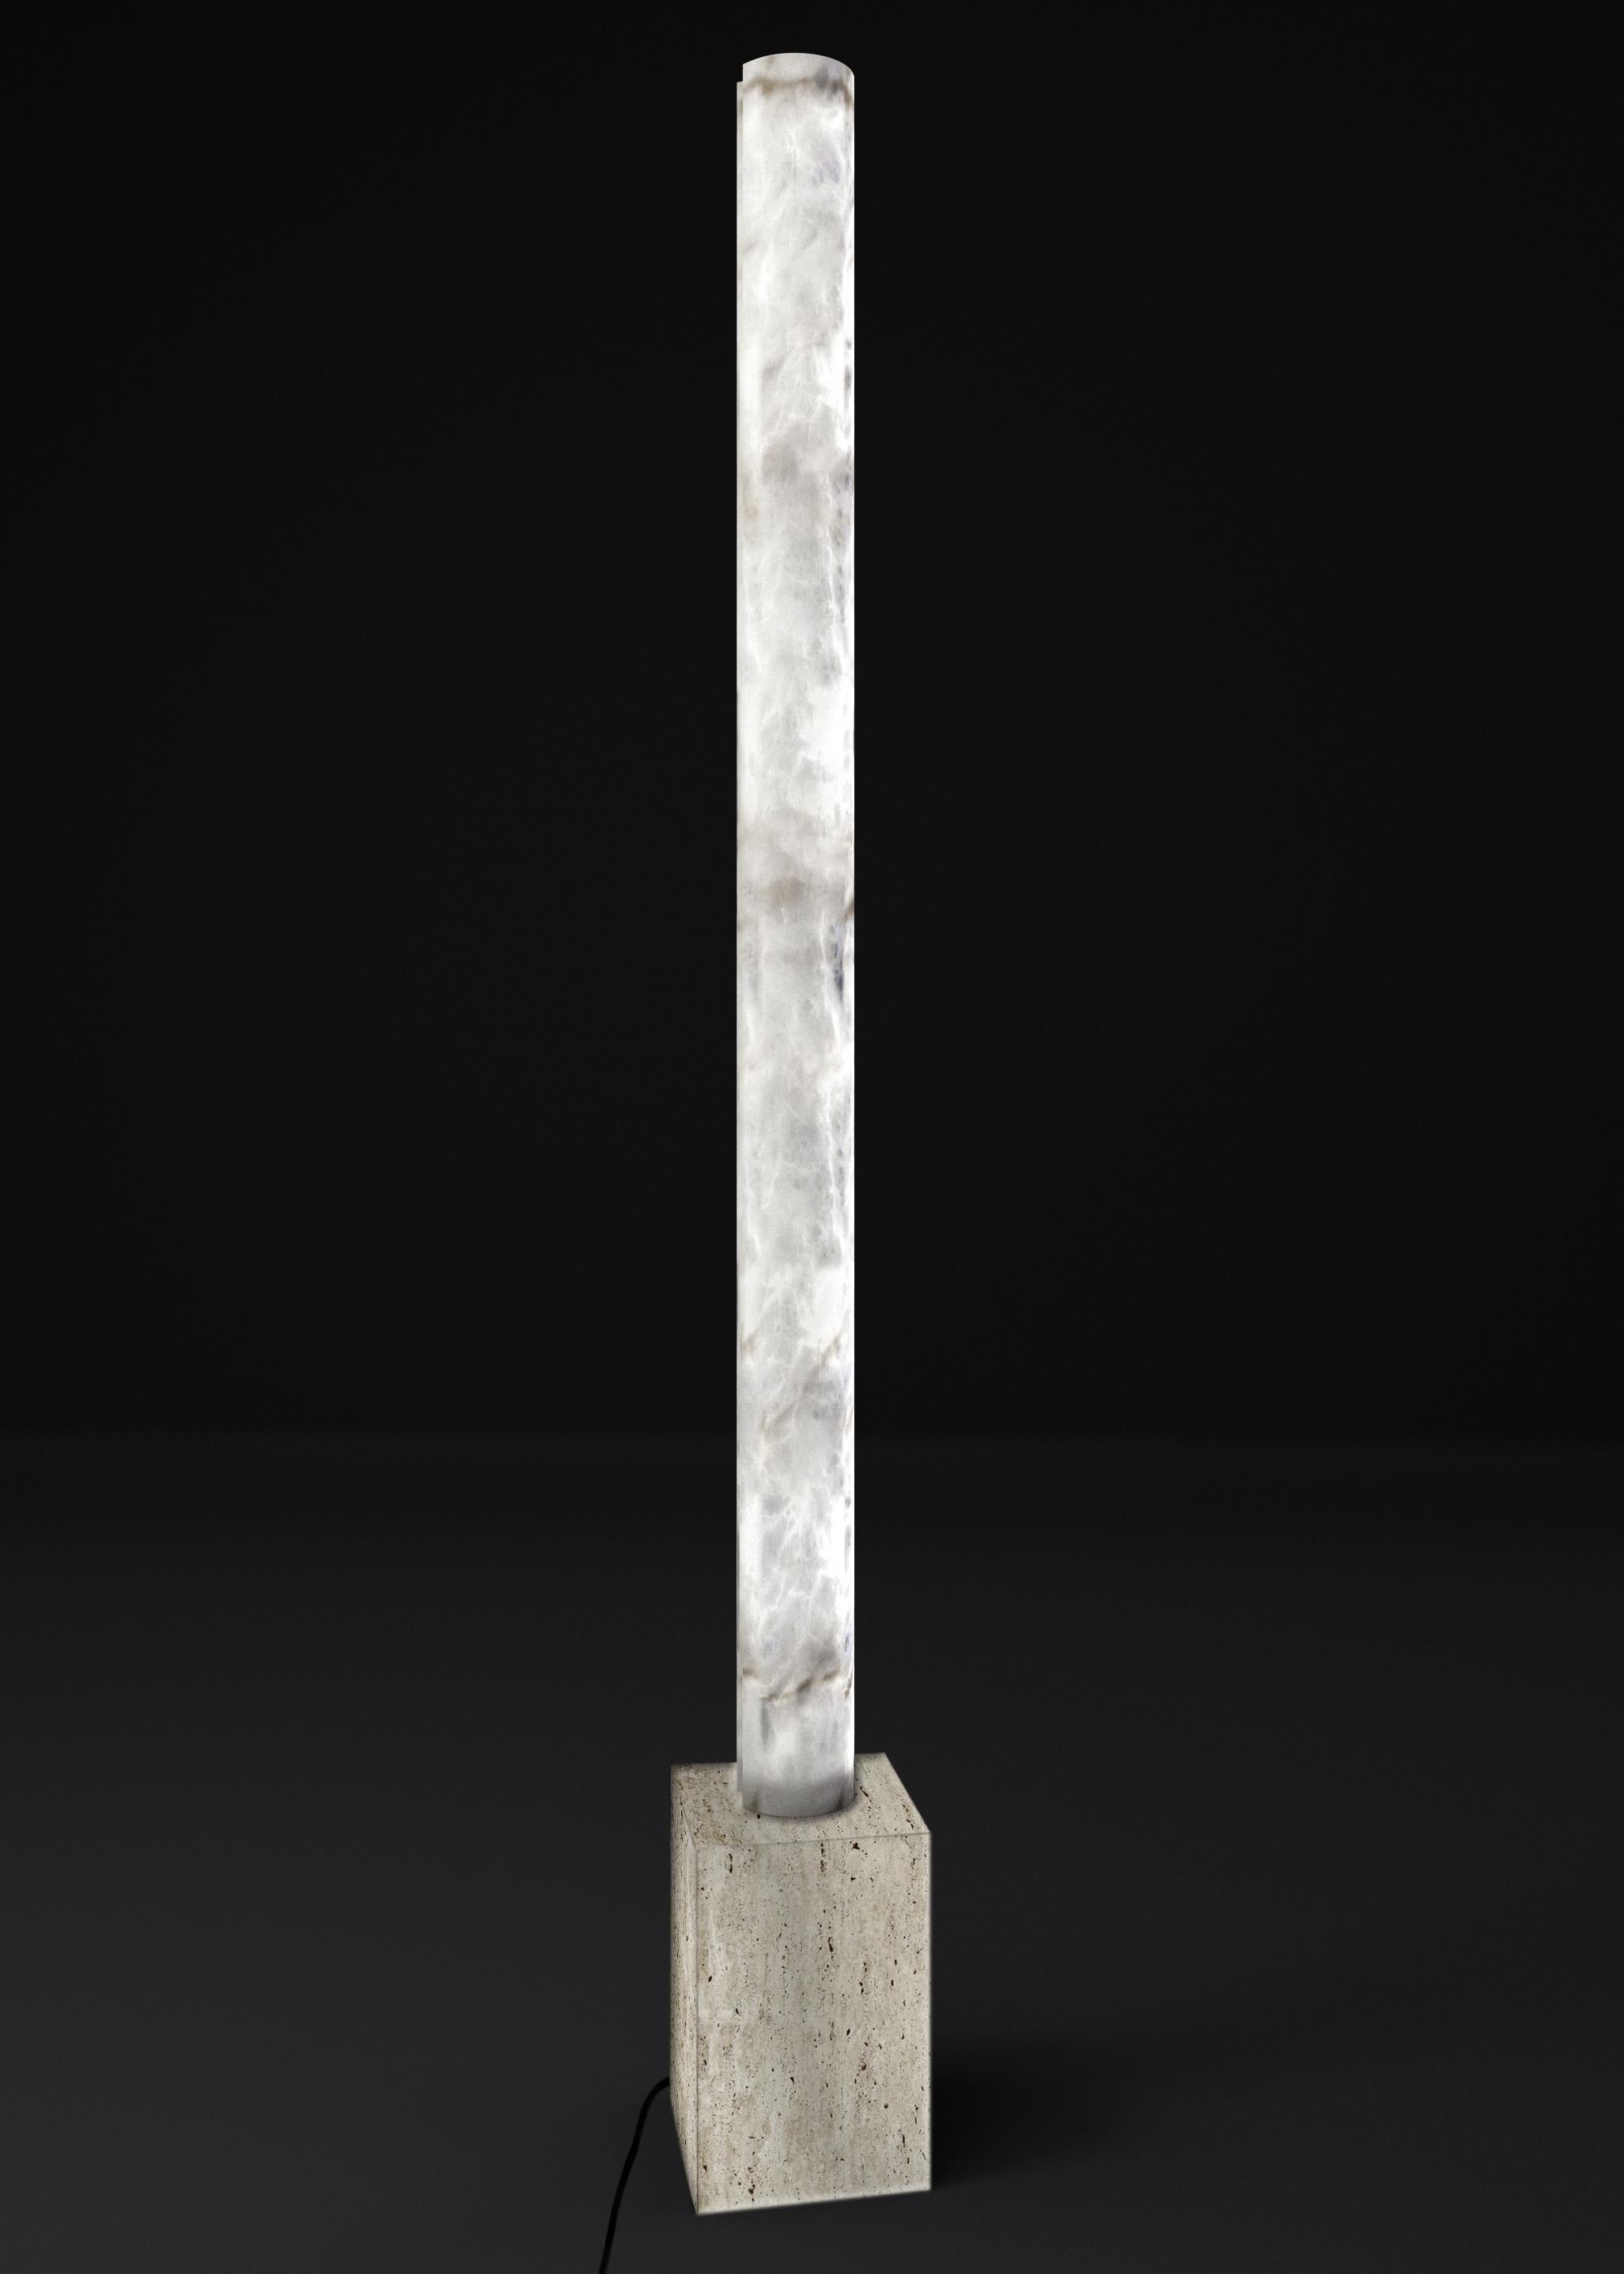 Zeus Travertino Floor Lamp by Alabastro Italiano
Dimensions: D 25 x W 25 x H 185 cm.
Materials: White alabaster and travertine.

Available in different finishes: Black Marquinia marble, Emperador marble, Travertino stone and Verde Alpi marble.